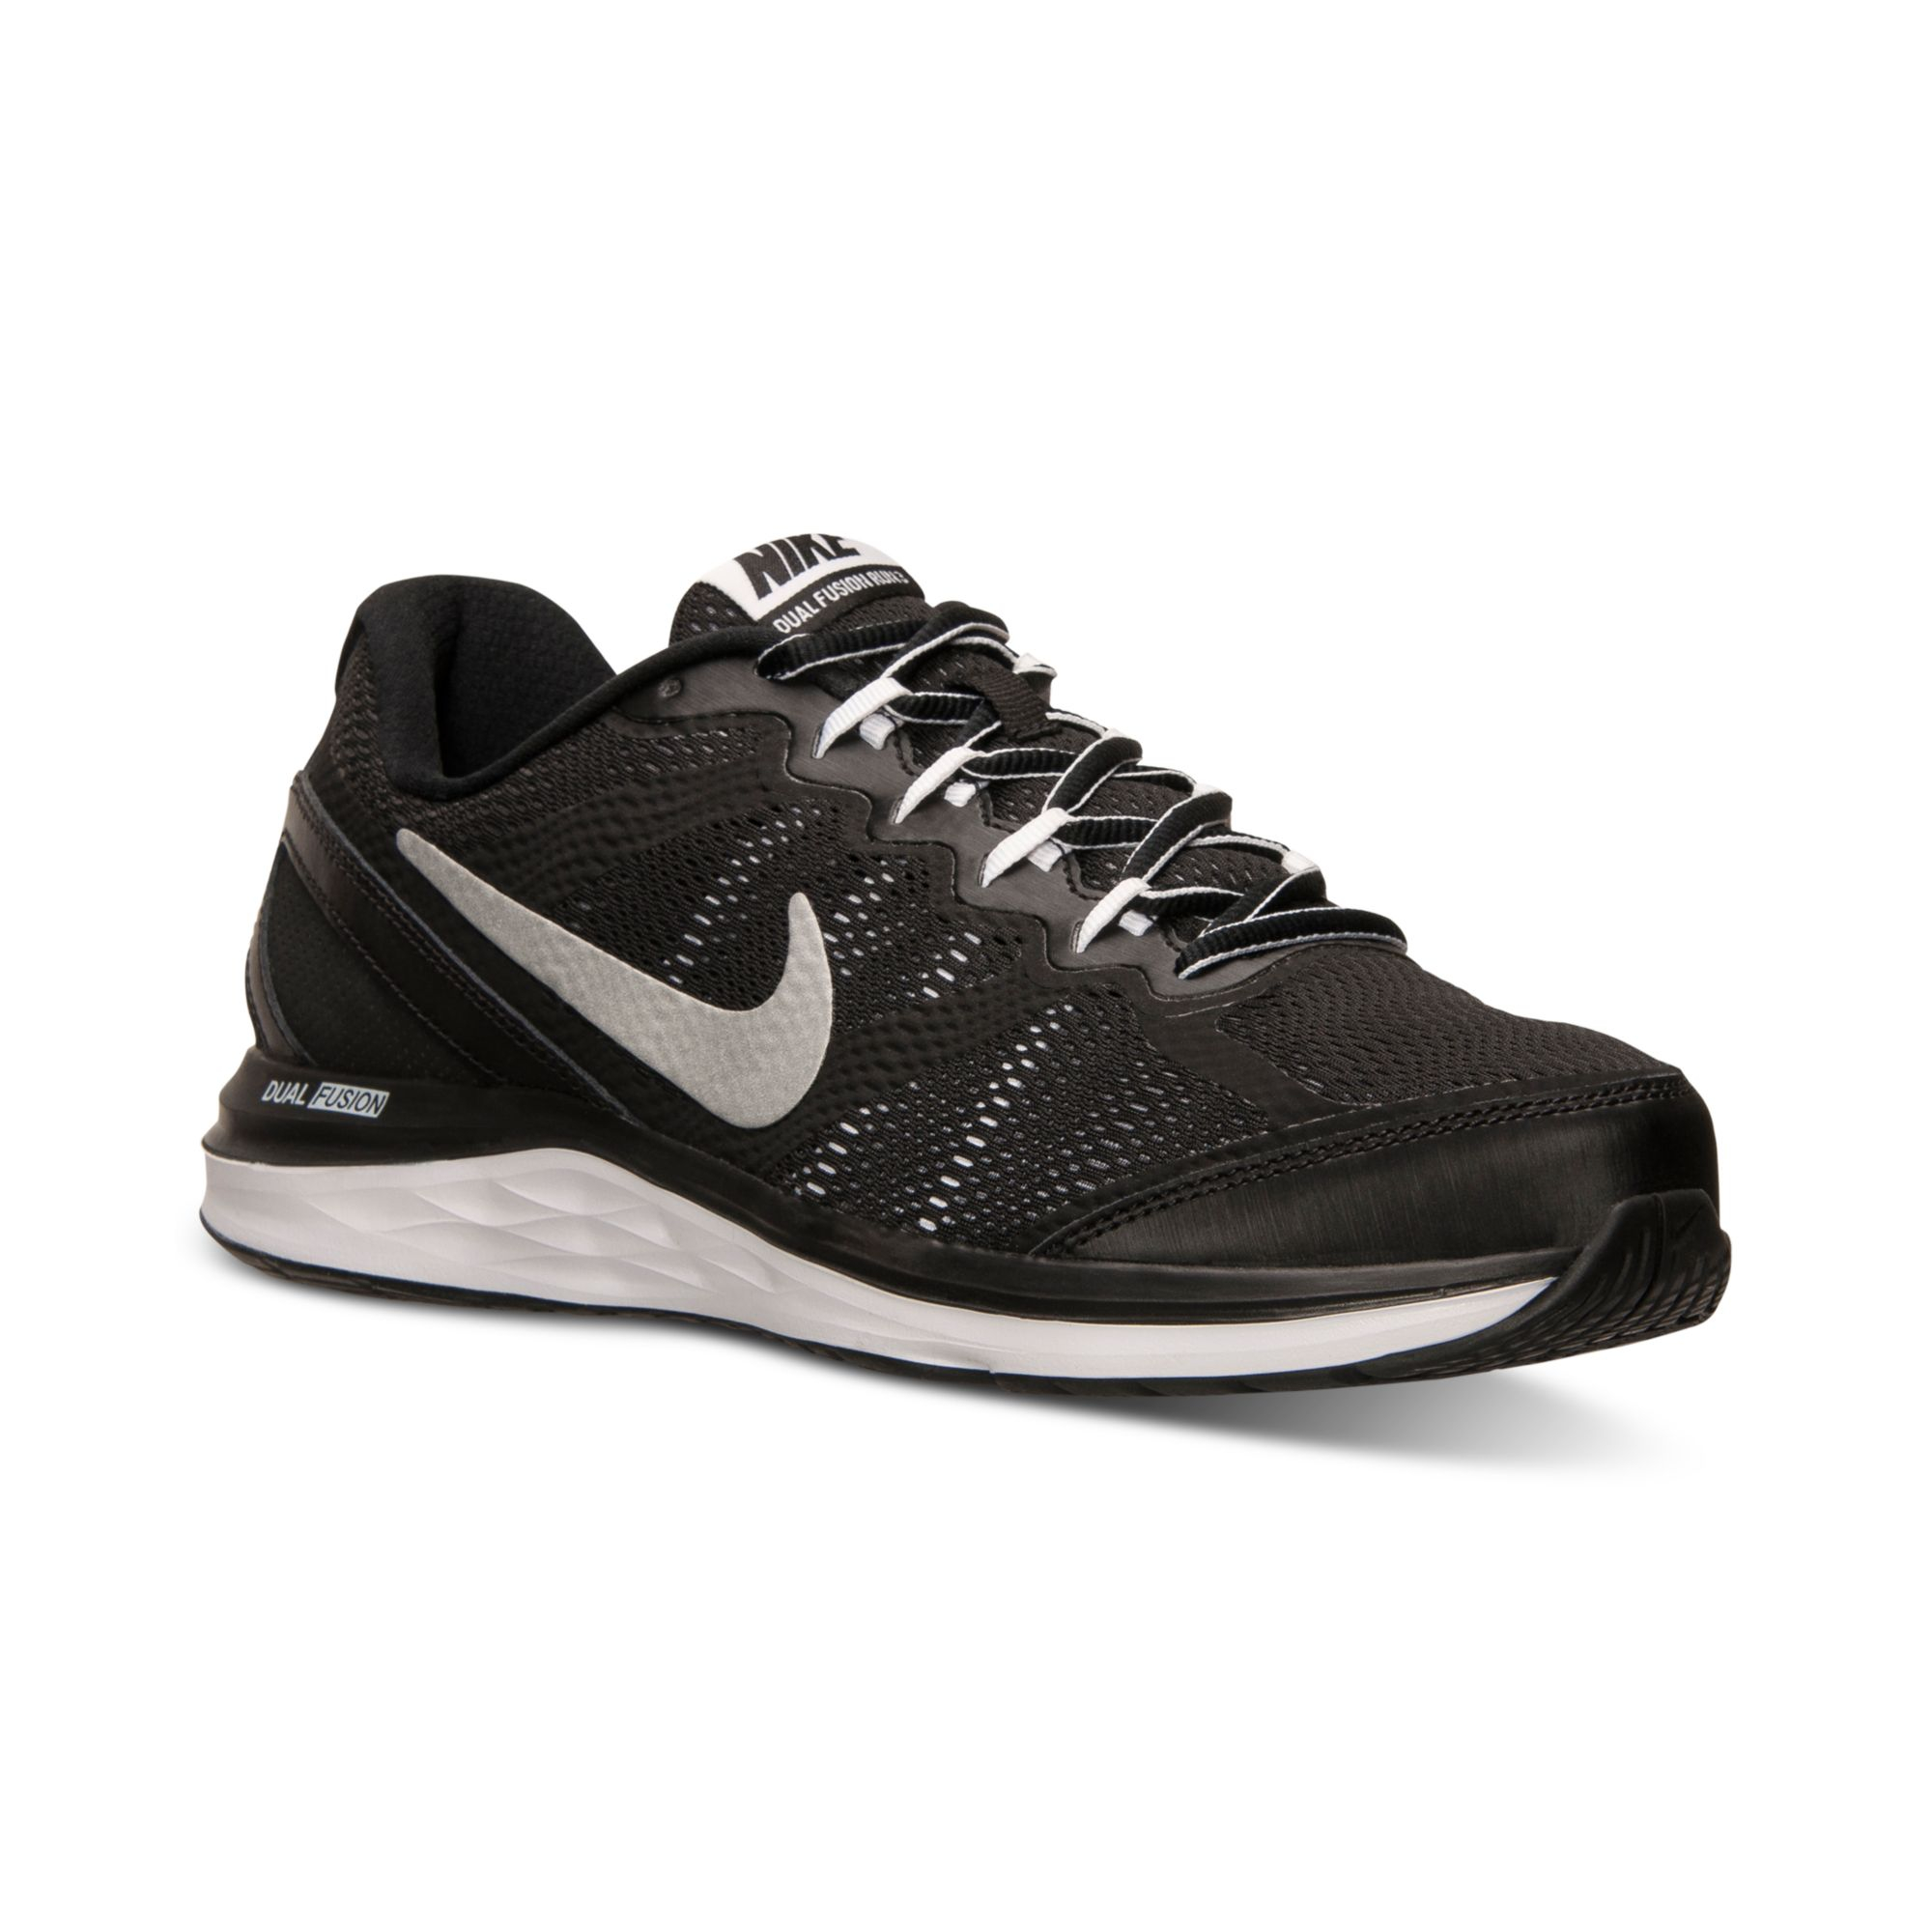 Nike Men'S Dual Fusion Run 3 Running Sneakers From Finish Line in Black ...